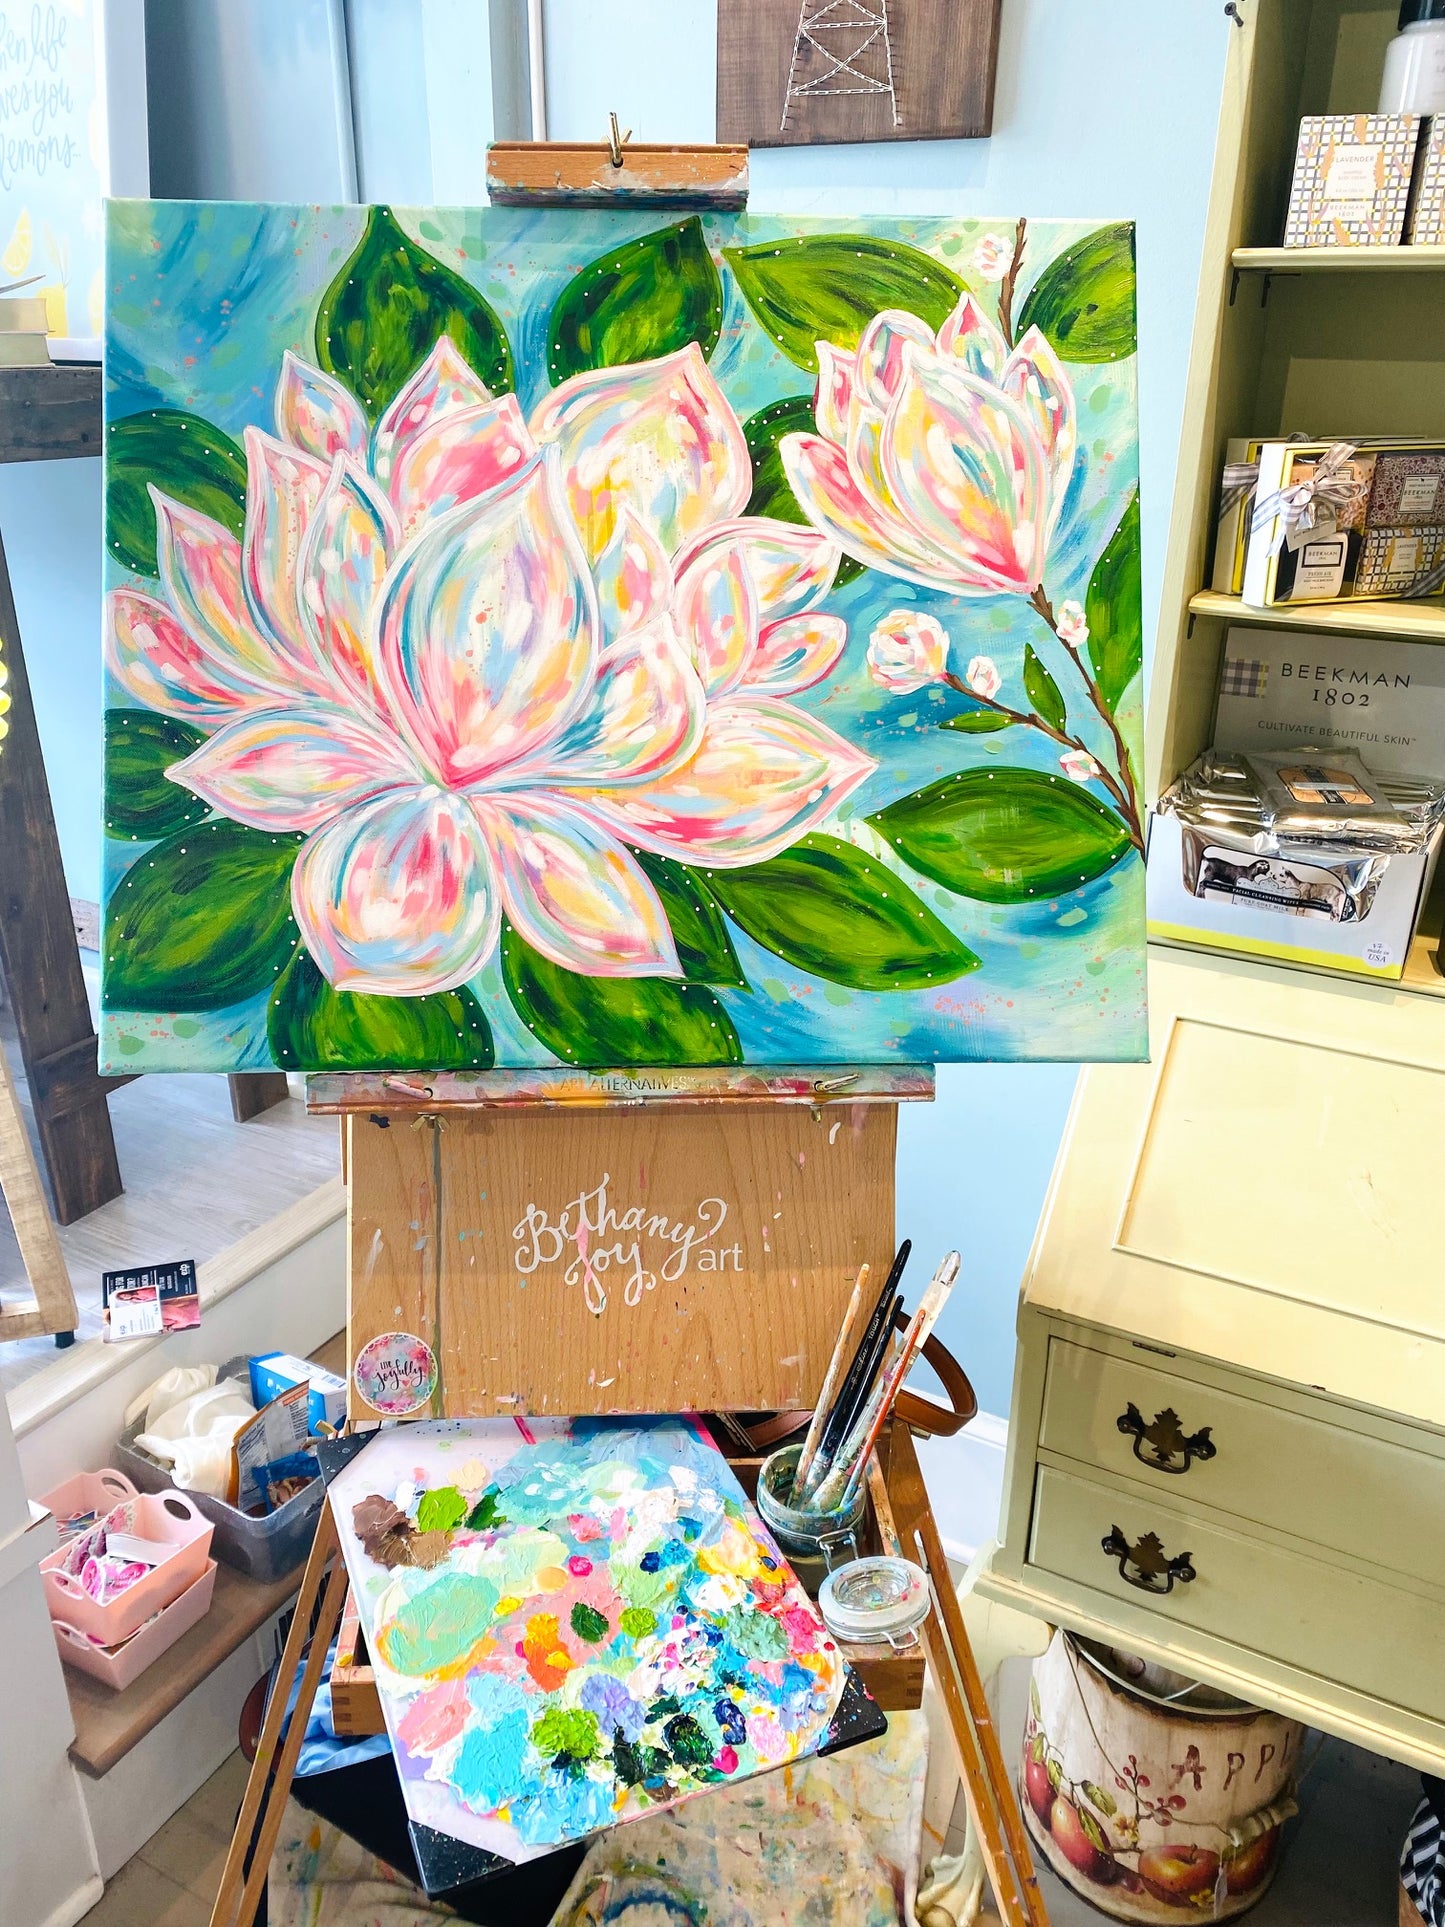 Magnolia 20x24 inch original floral painting on canvas